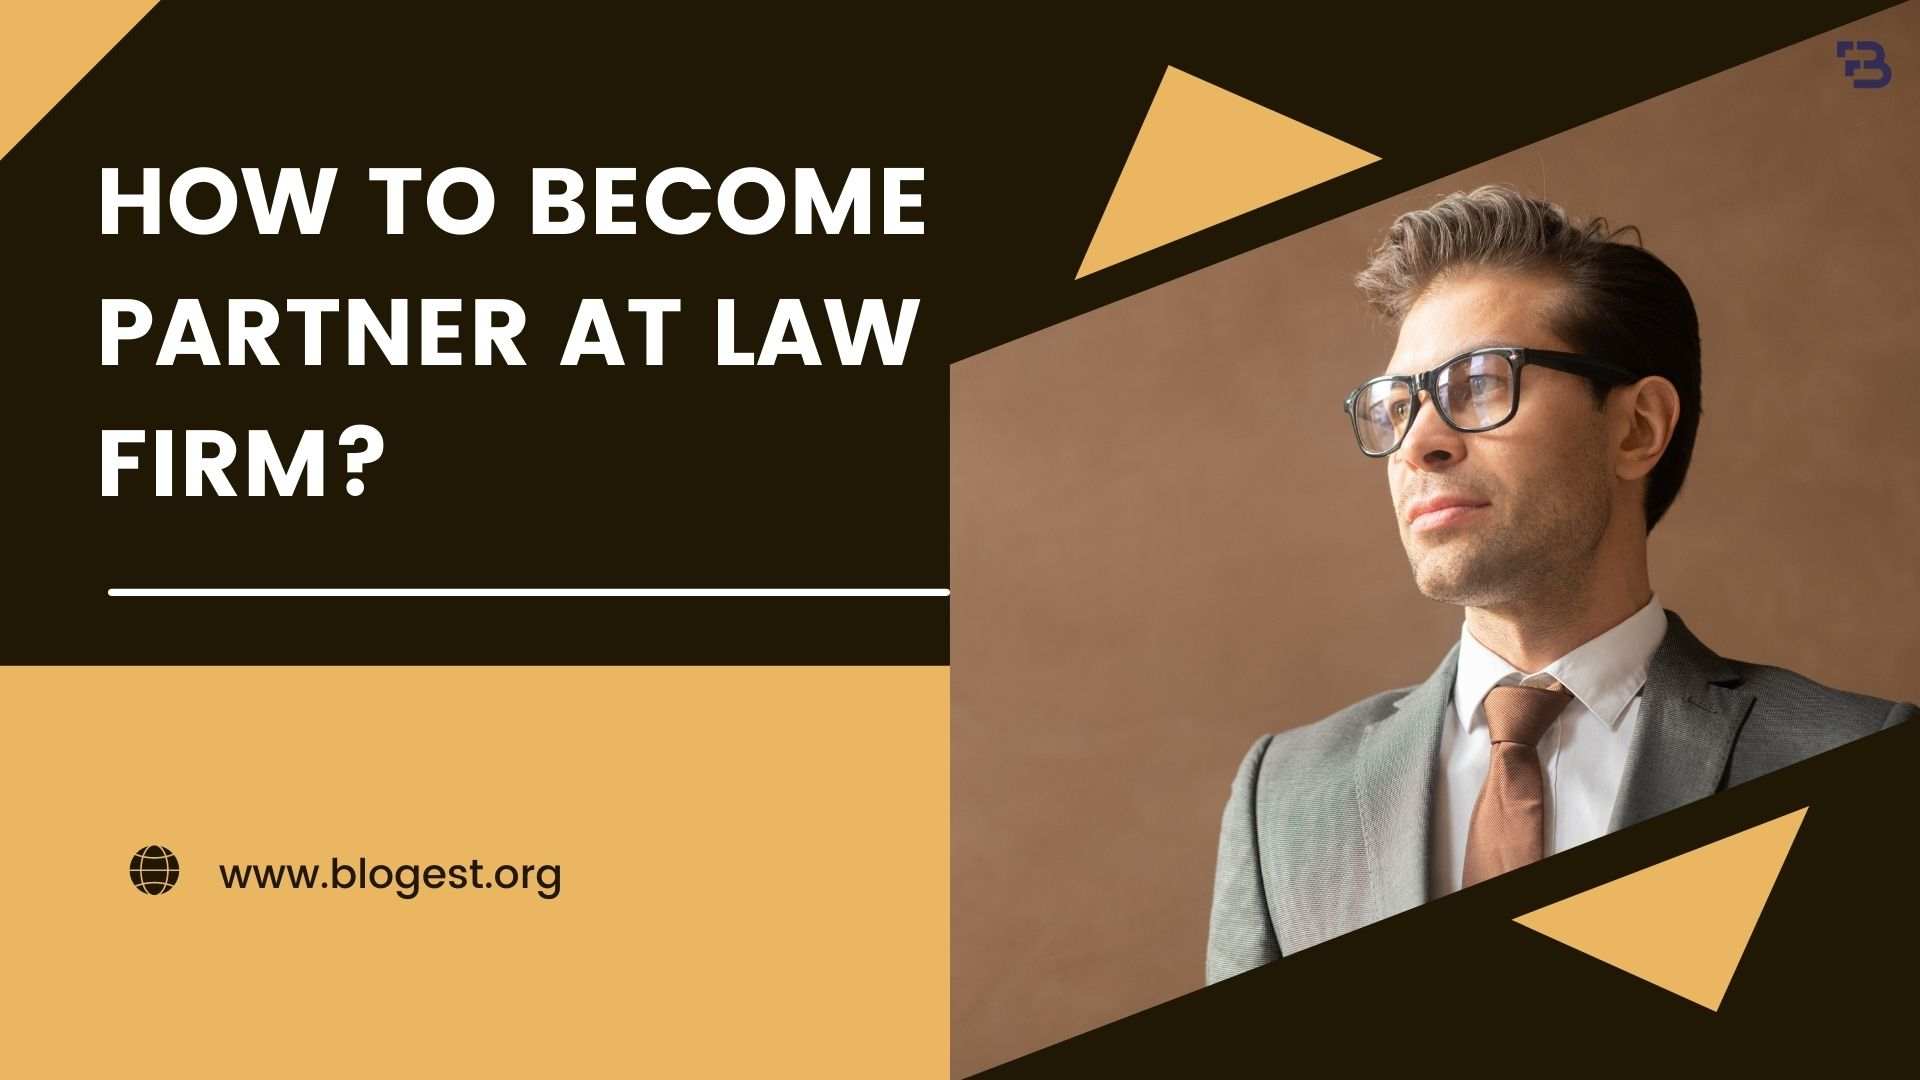 How To Become Partner At Law Firm?